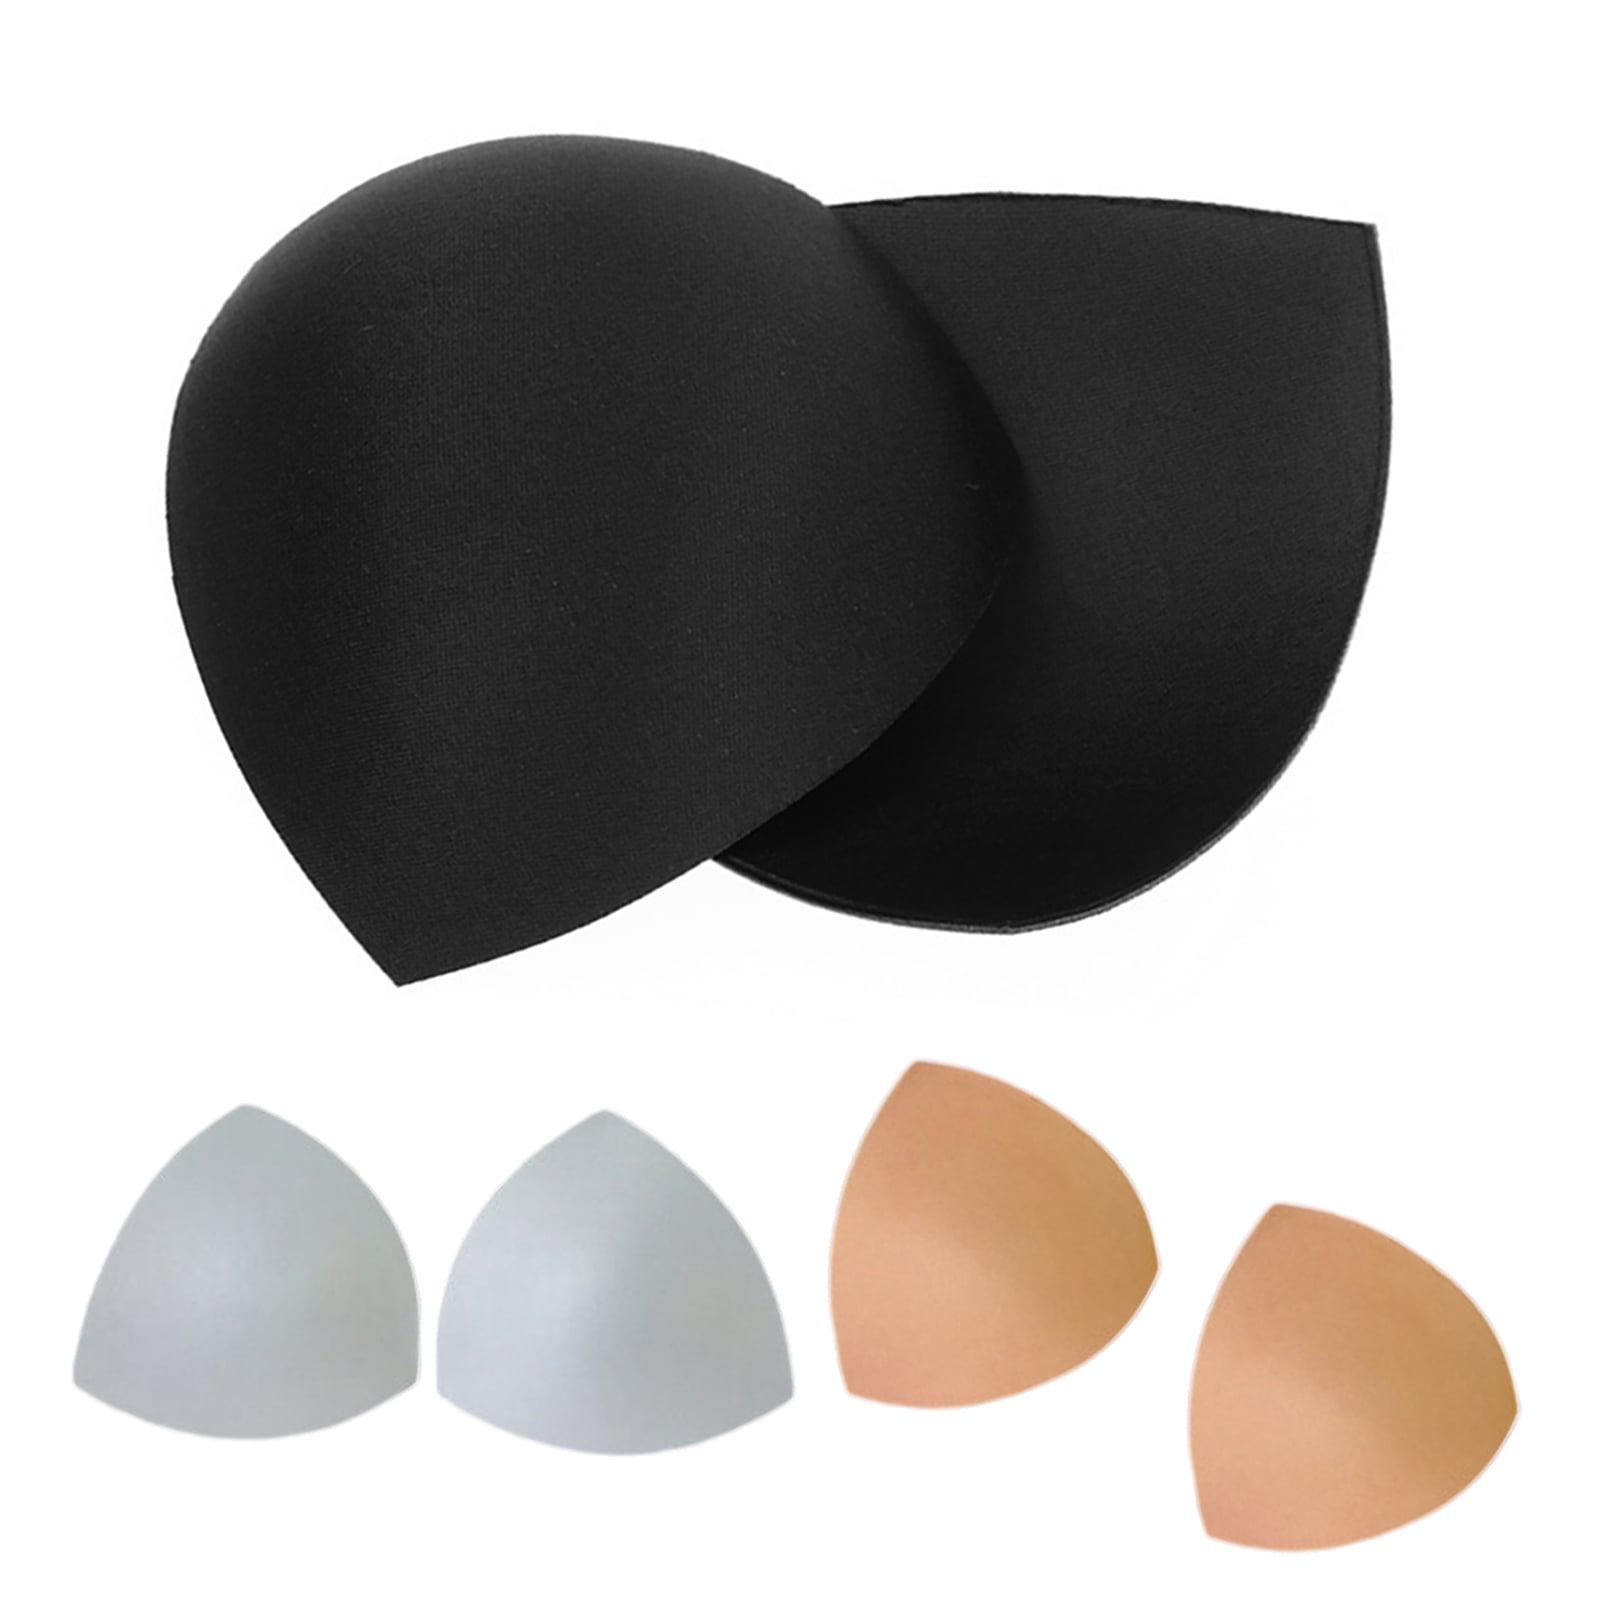 FANMAOUS 4 Pairs Bra Pad Insert,Removable Sport Bra Cup Triangle Breathable  & Reusable Bra Pad for Yoga Bra,Swimsuits,Bikini (B/C Beige 4 pairs)